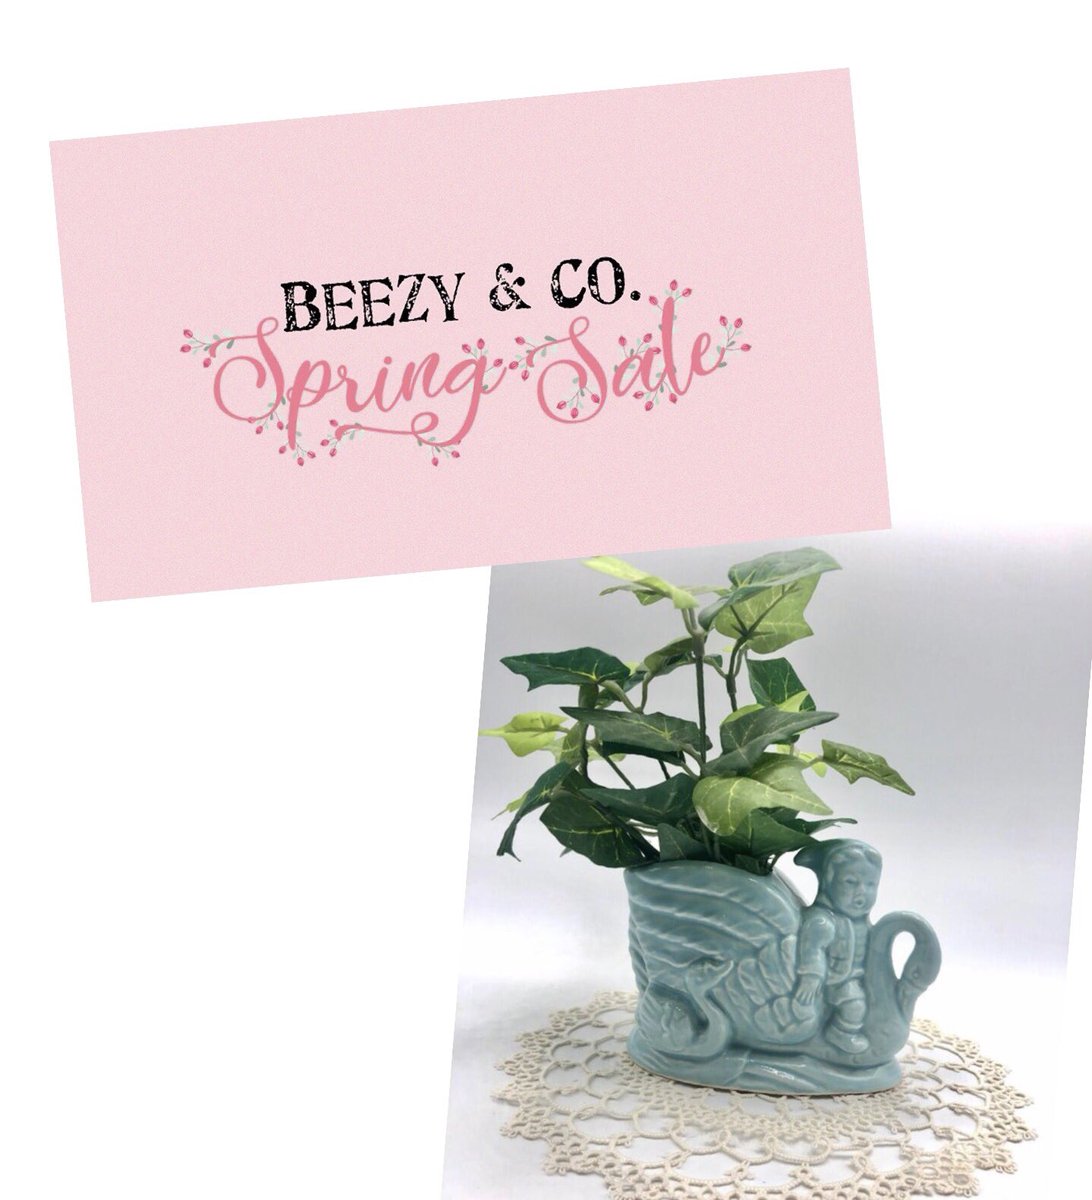 Spring ahead savings @beezyandco on @Etsy 20% off all vases & planters until March 20th 💐 #vintage #etsy #SpringAhead #spring #SpringForward #springsavings #vases #planters #flowers #plants #MarchMadness #sale #springsale #SundayFunday #etsygifts #etsyfinds #SpringBreak #shop